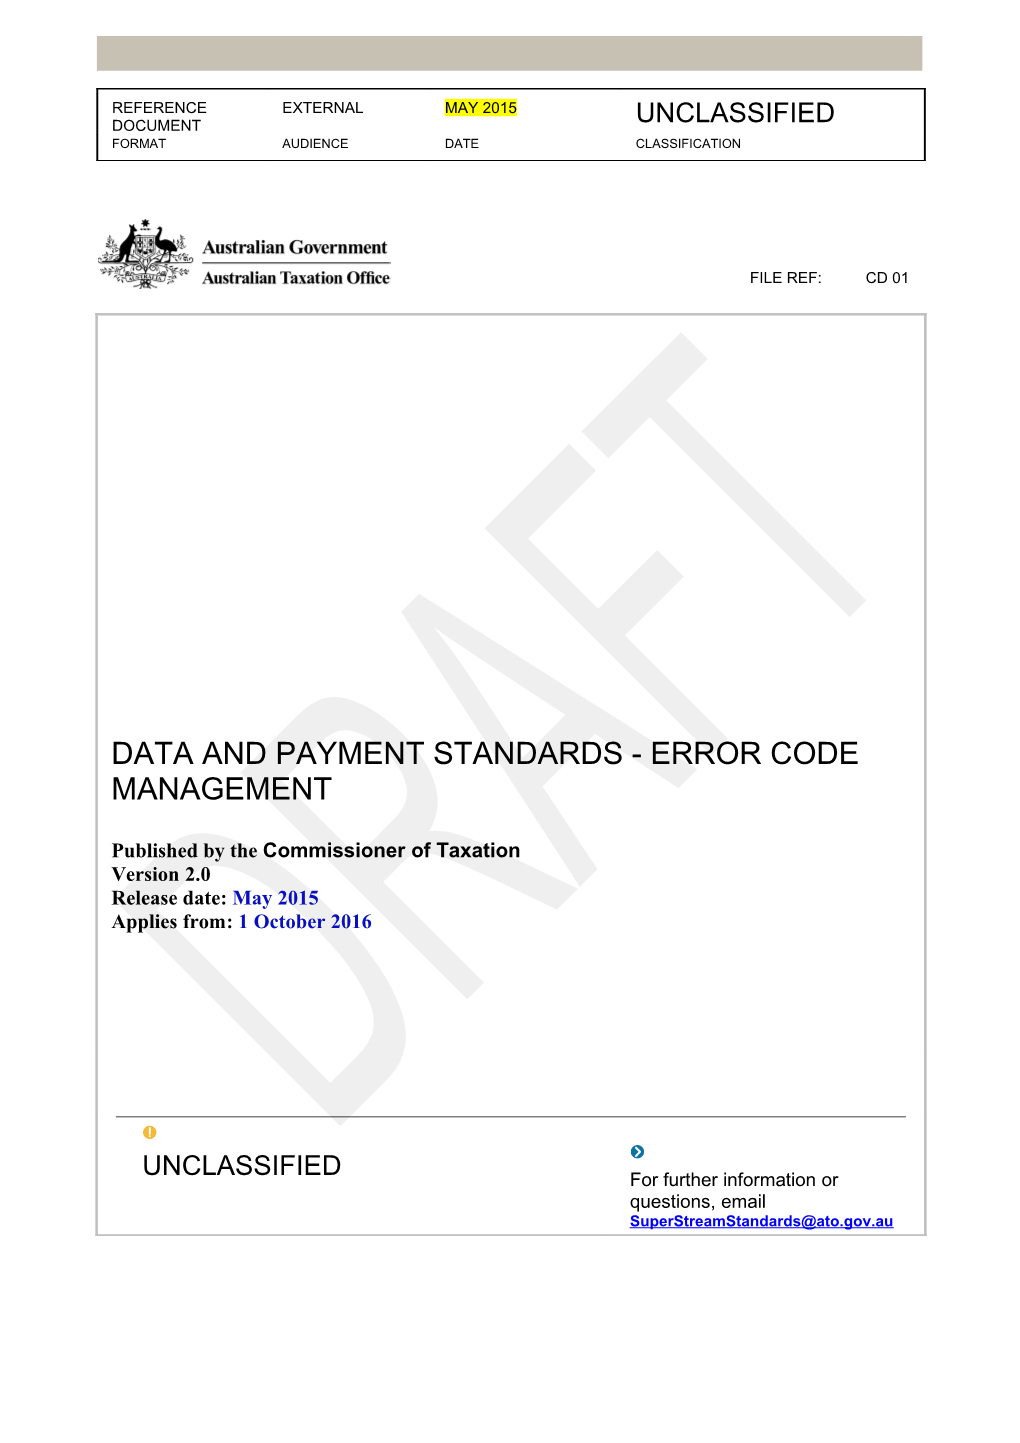 TCN 6 Data and Payment Standards - Error Code Management 09 01 13